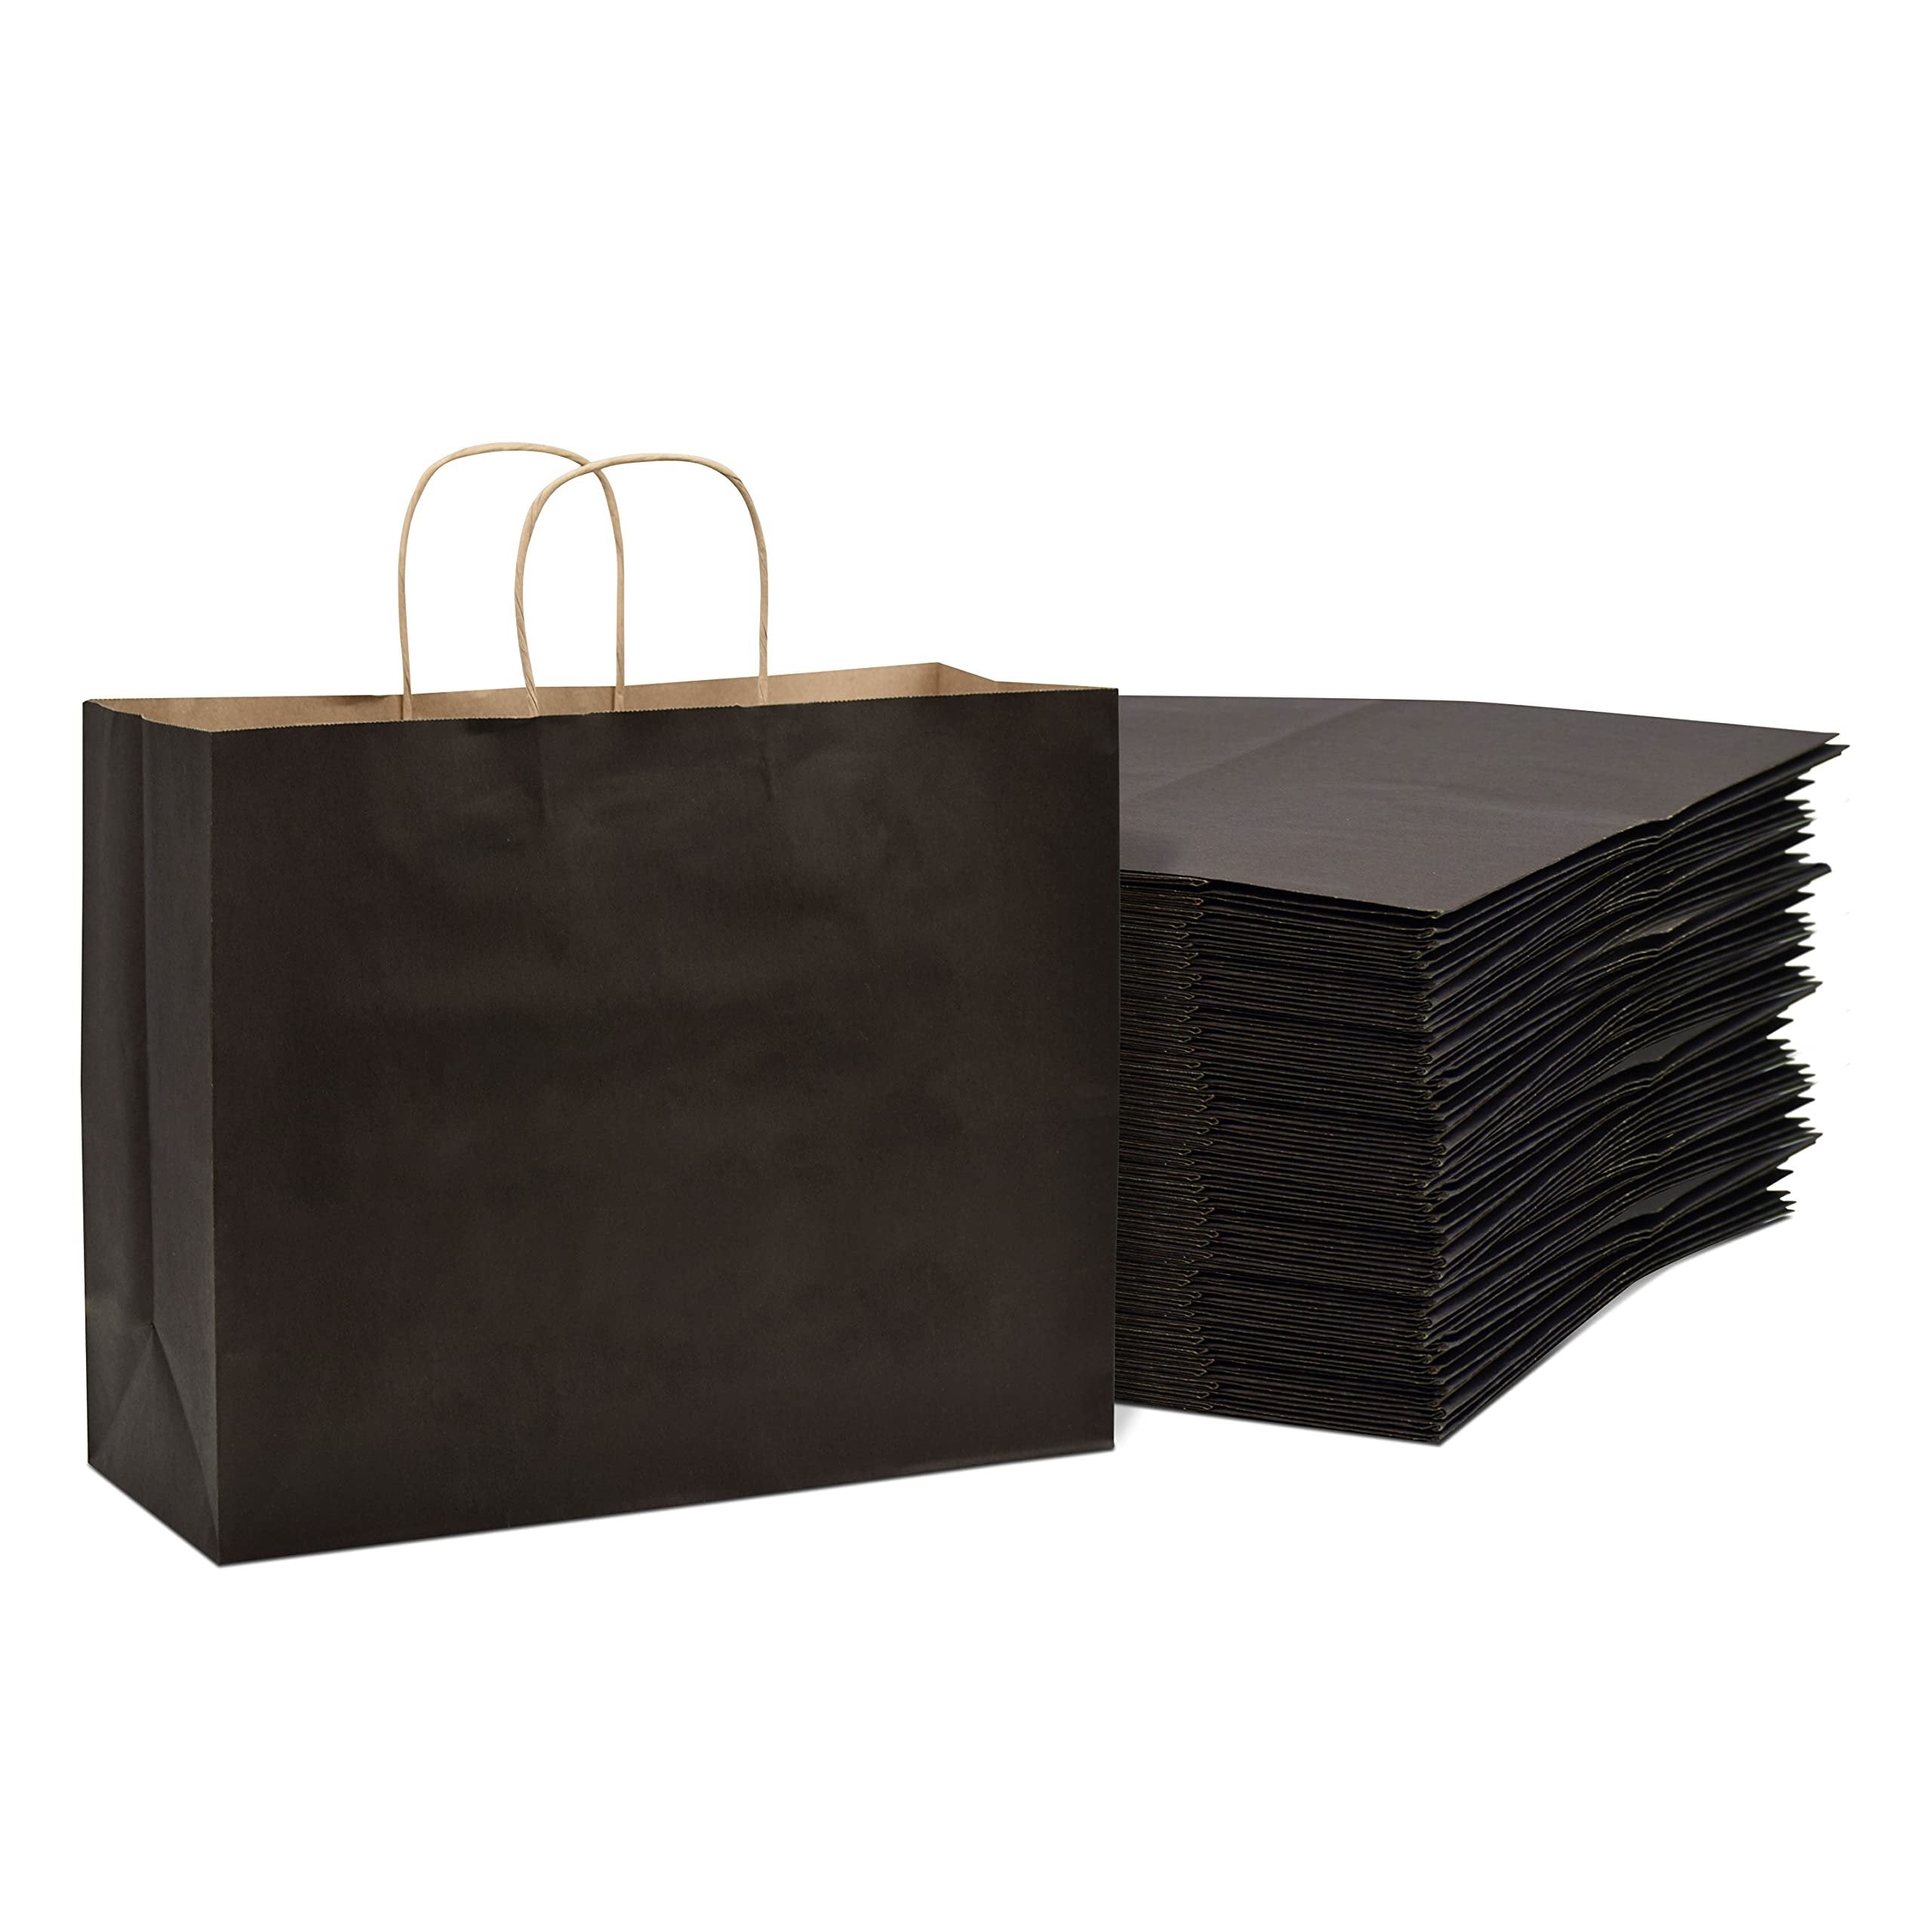 Prime Line Packaging Black Paper Bags - 16x6x12 Inch (50 Pack) Large Kraft Shopping Bags for Boutiques, Retail Stores, Parties, and Gifts